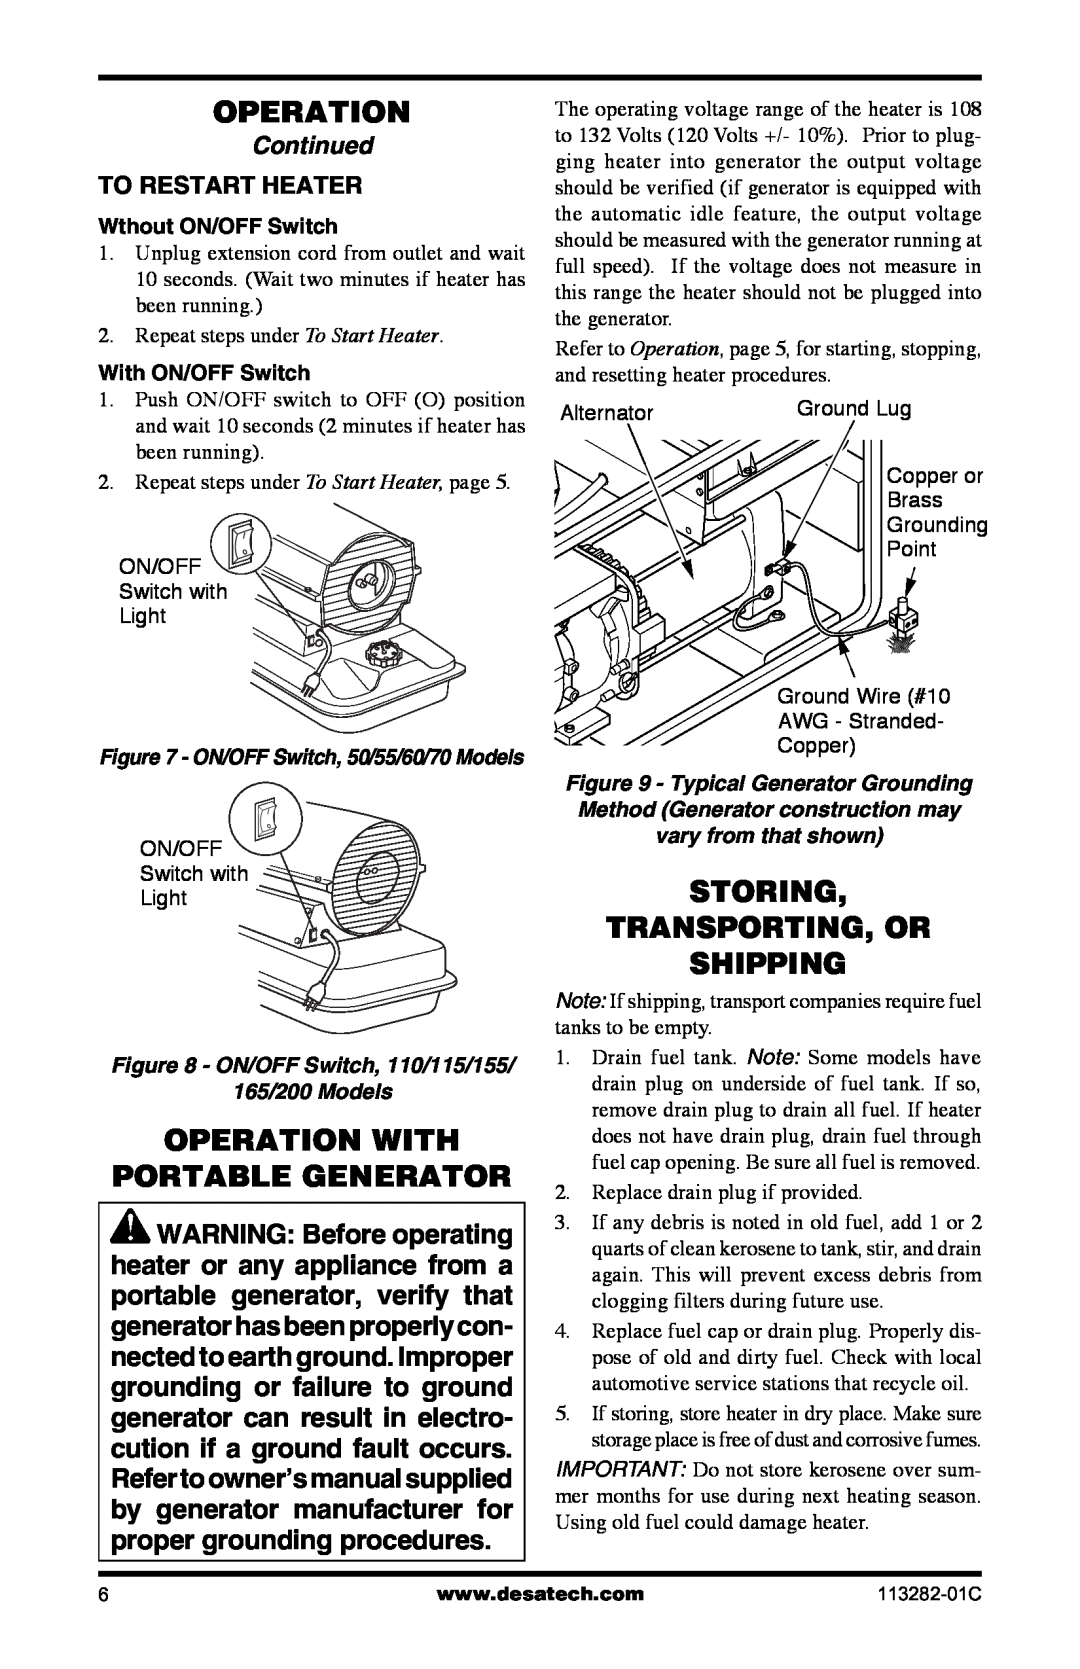 Desa BTU/HR owner manual Operation With Portable Generator, Storing Transporting, Or Shipping, Continued, To Restart Heater 